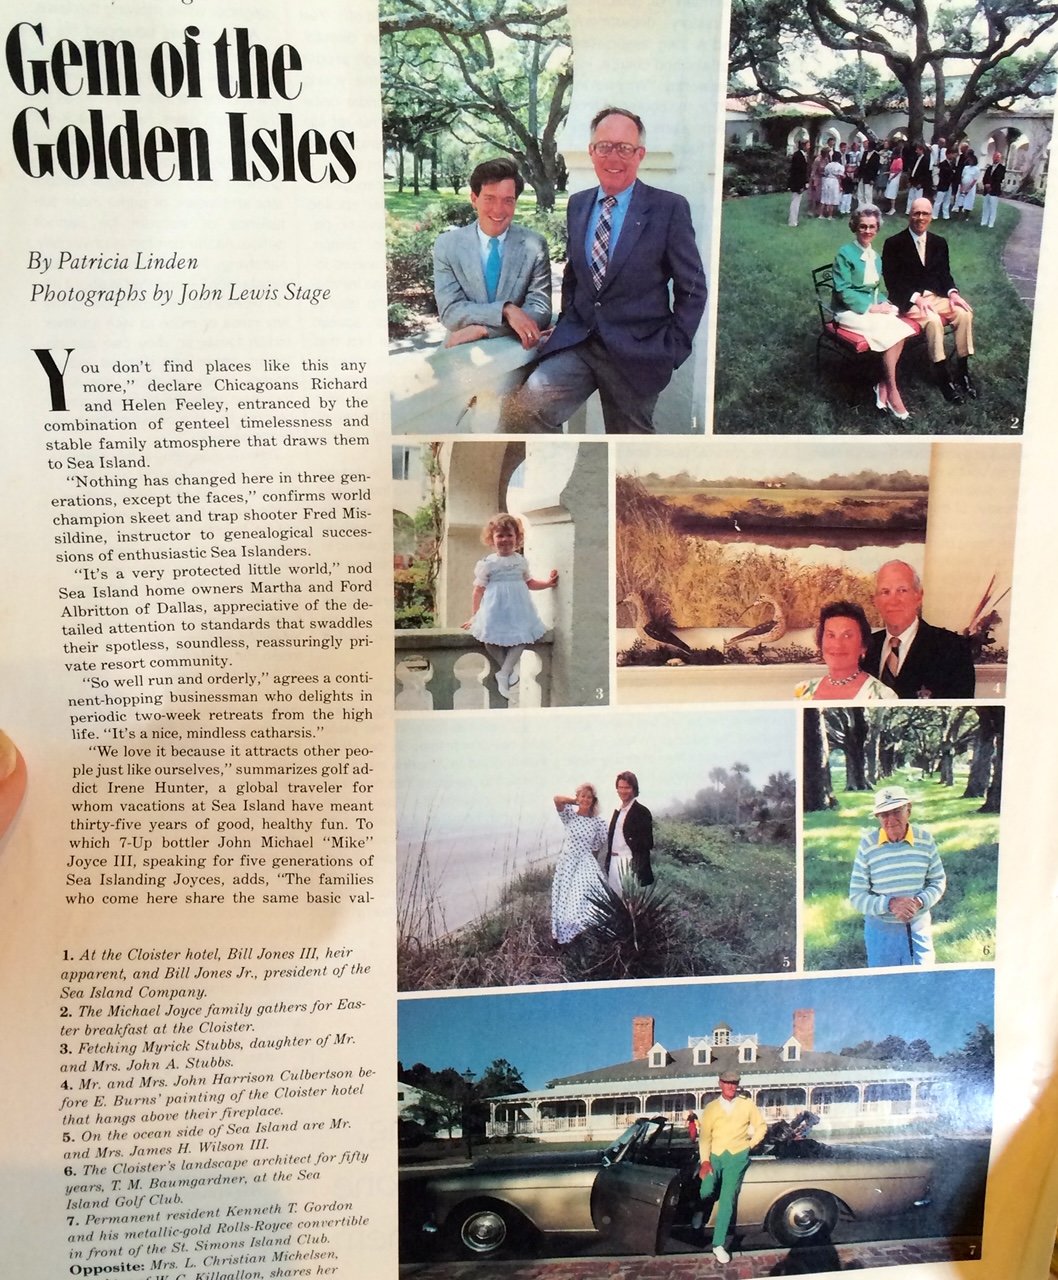 Original Town and Country Article about Sea Island with My Stepfather Ken Gordon